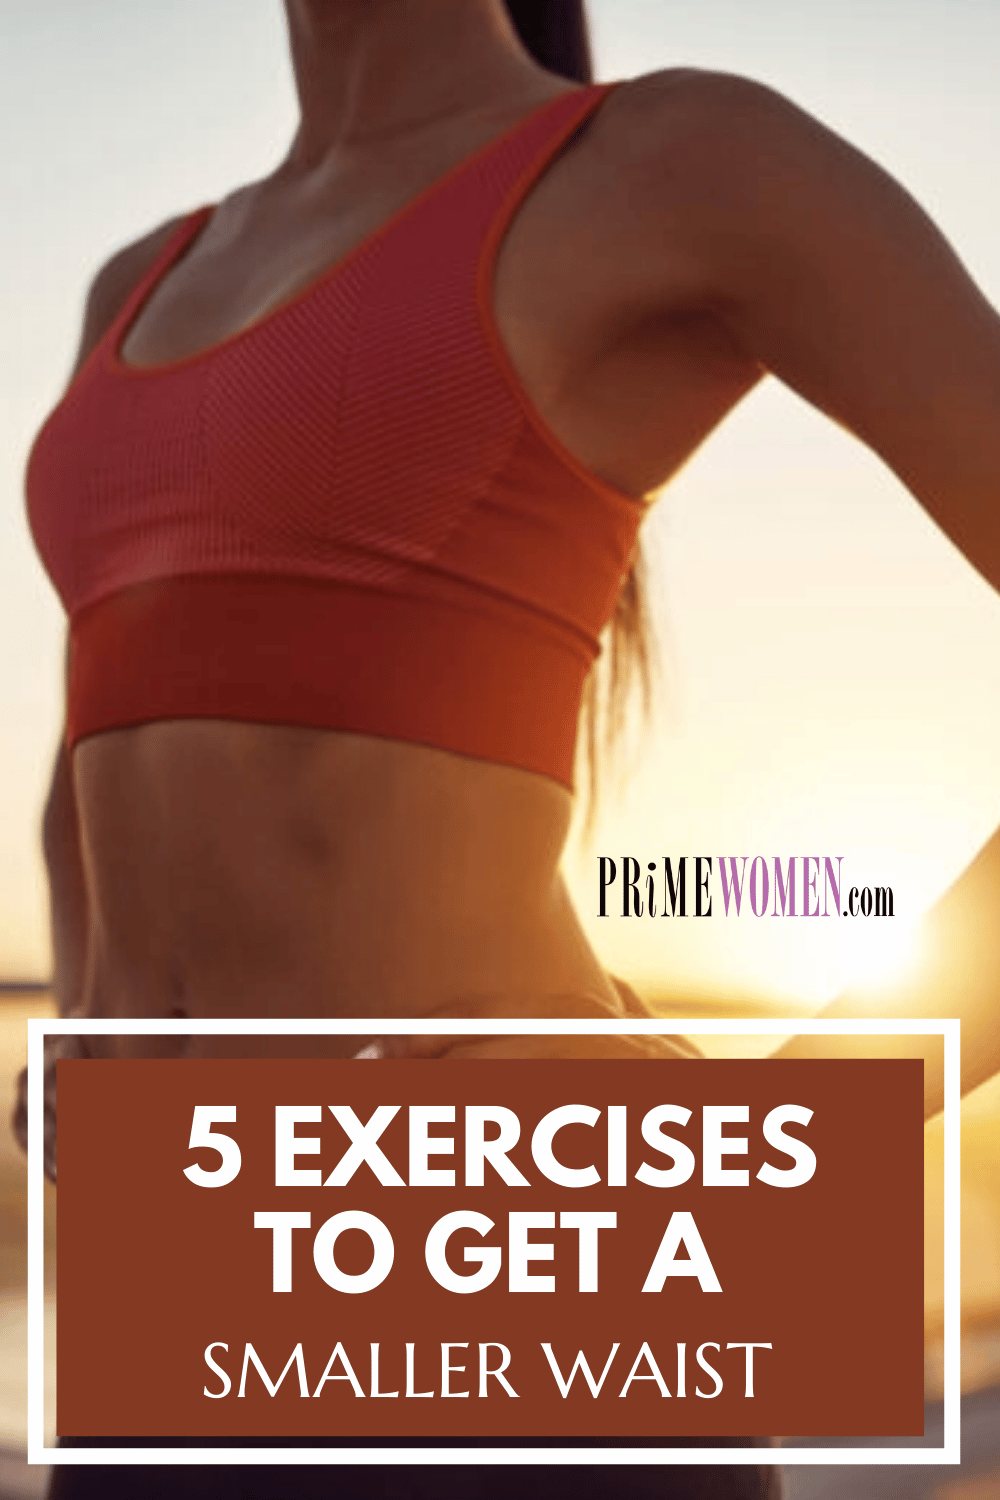 5 Exercises to Get a Smaller Waist